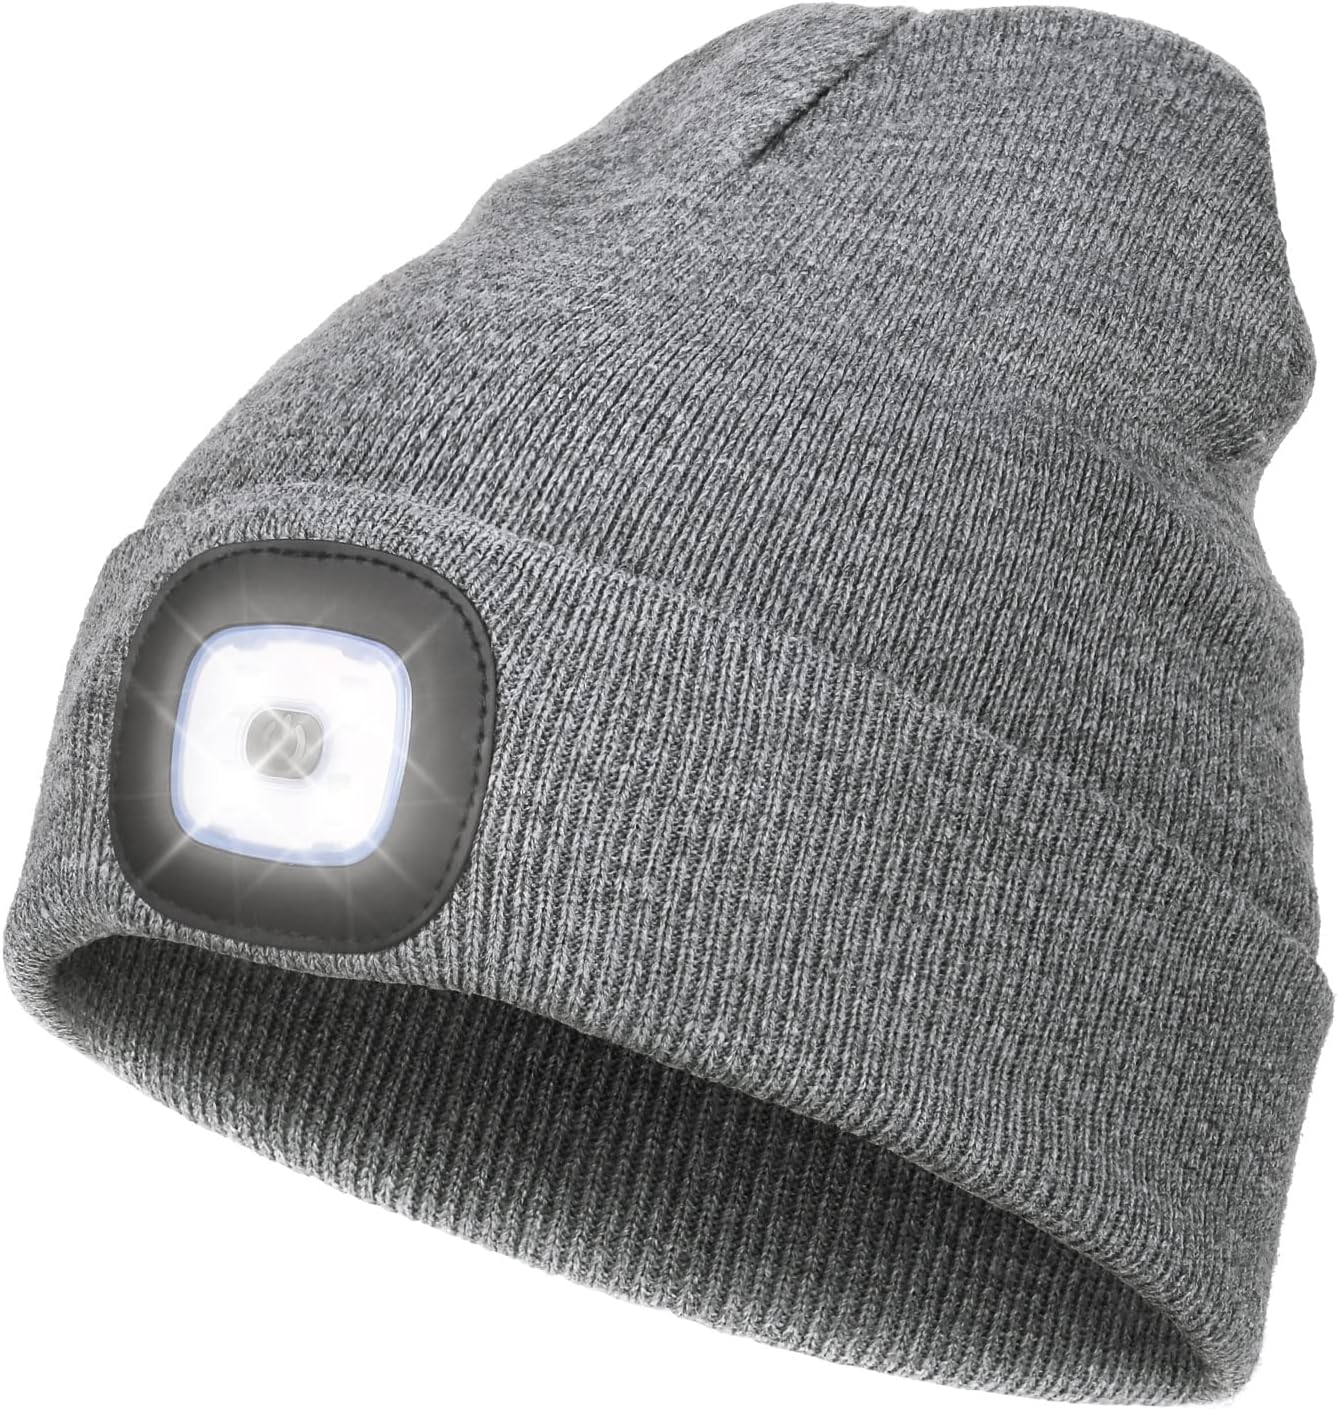 Beanie with Light, LED Beanie Hat with The Light Rechargable Flashlight Hat Headlamp Beanie,Night Lighted Hat Flashlight Women Men Gifts for Dad Him Husband - Delicate Leather